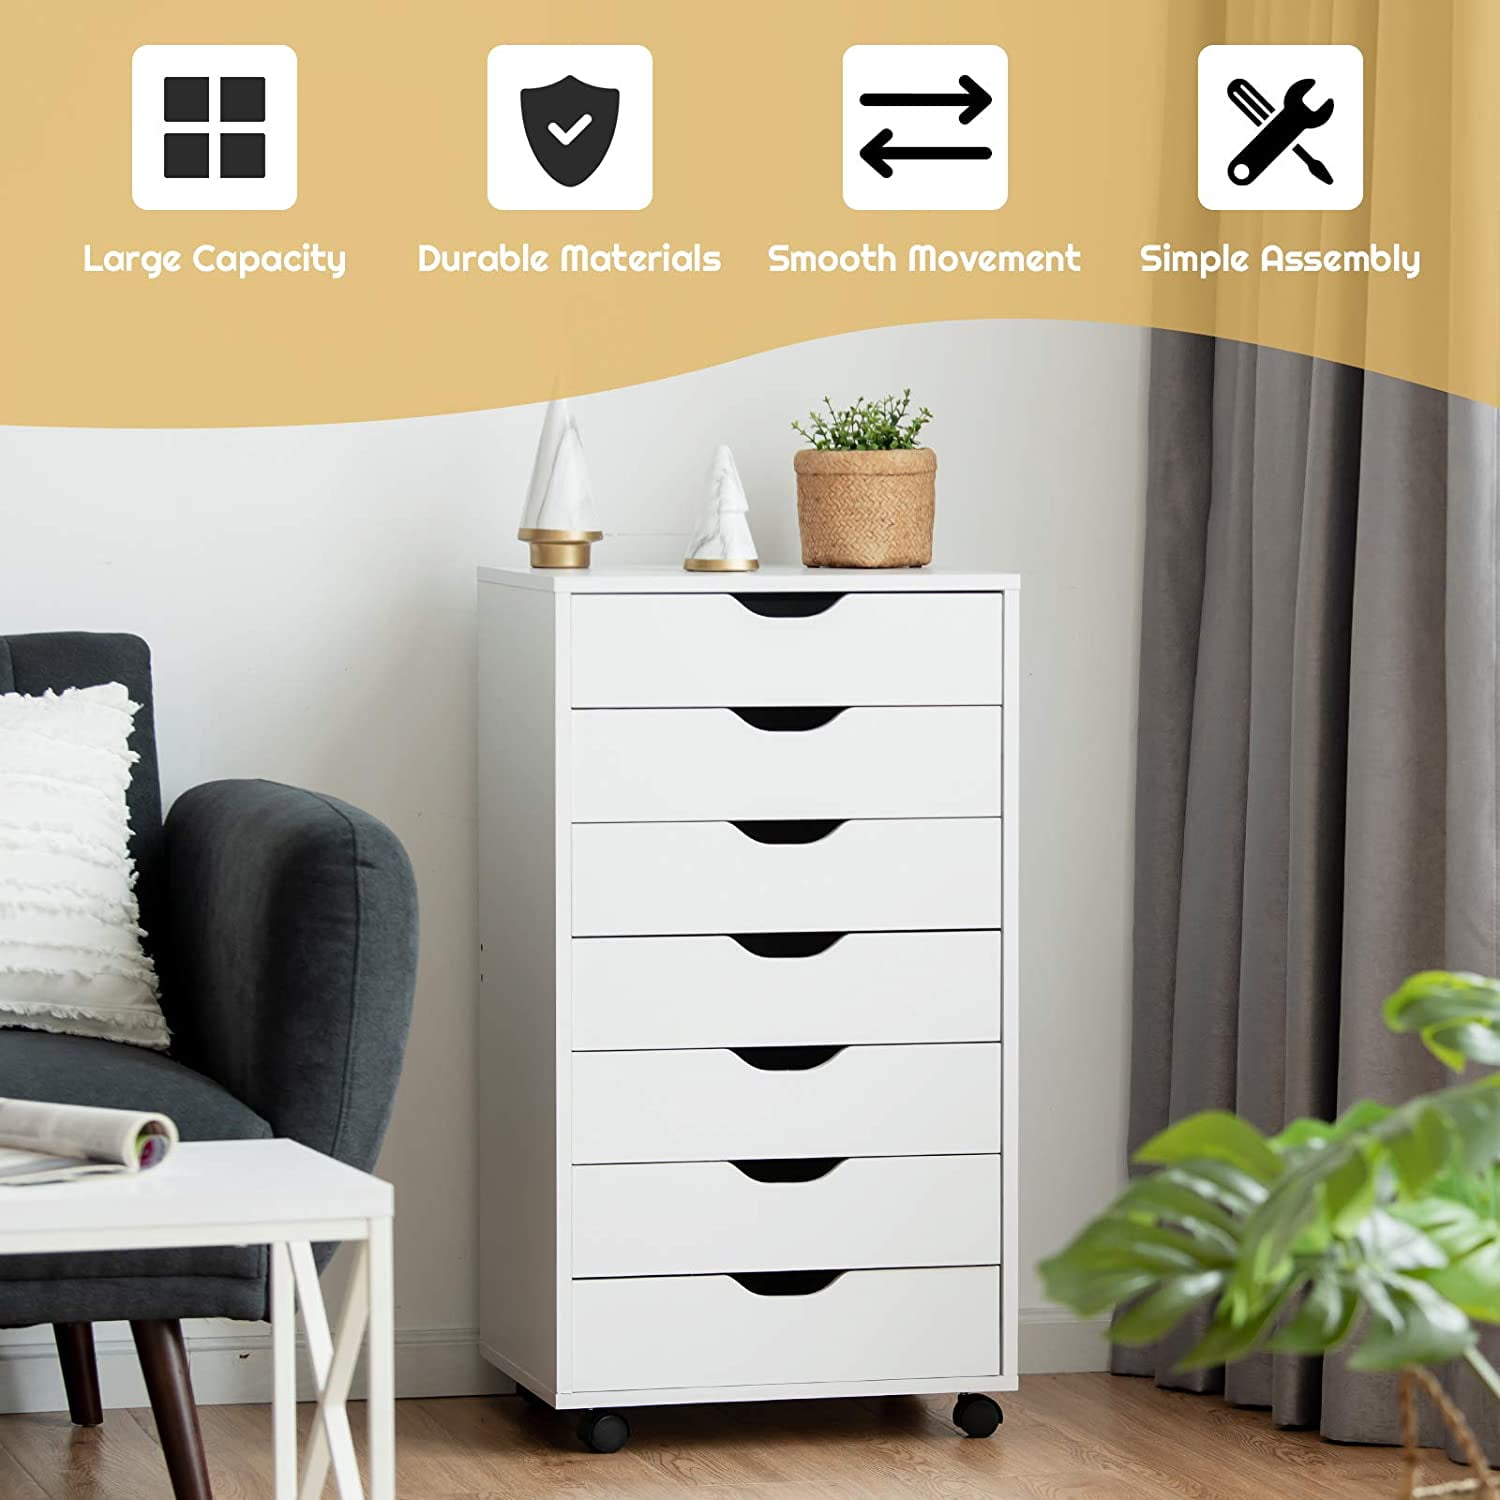 Details about   Bedroom Rolling Filing Cabinet File Storage Organizer Home Office w/Lock+Drawer 